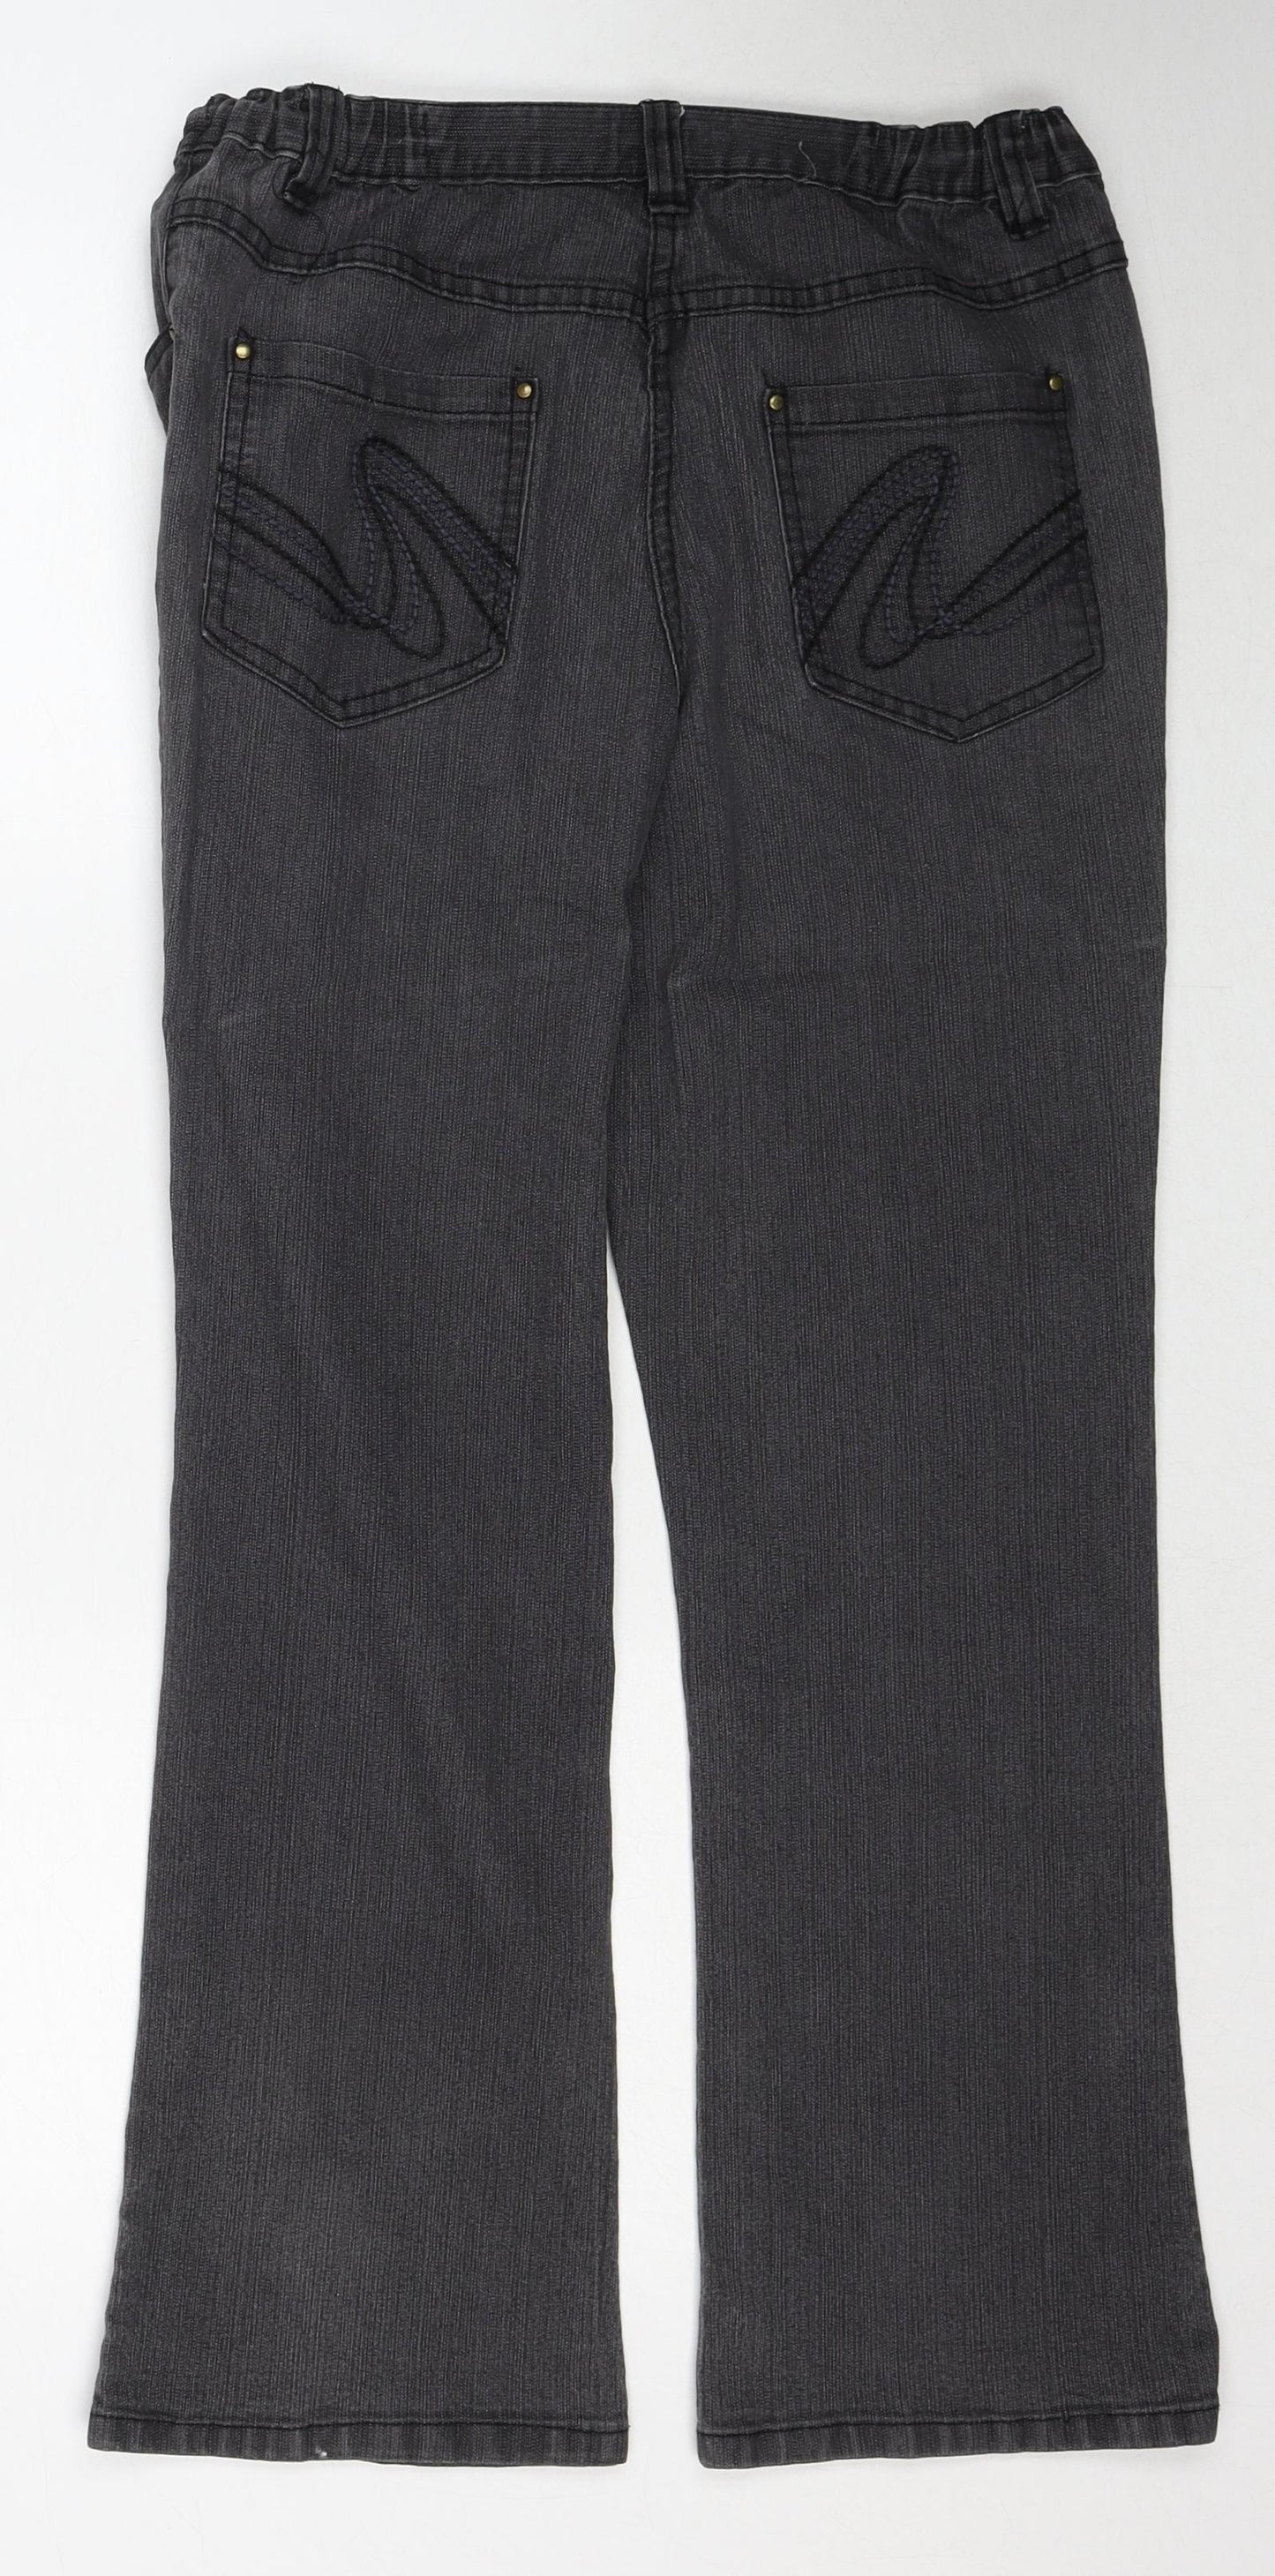 Savoir Womens Grey Cotton Bootcut Jeans Size 12 Slim Zip - Embroidered Pockets